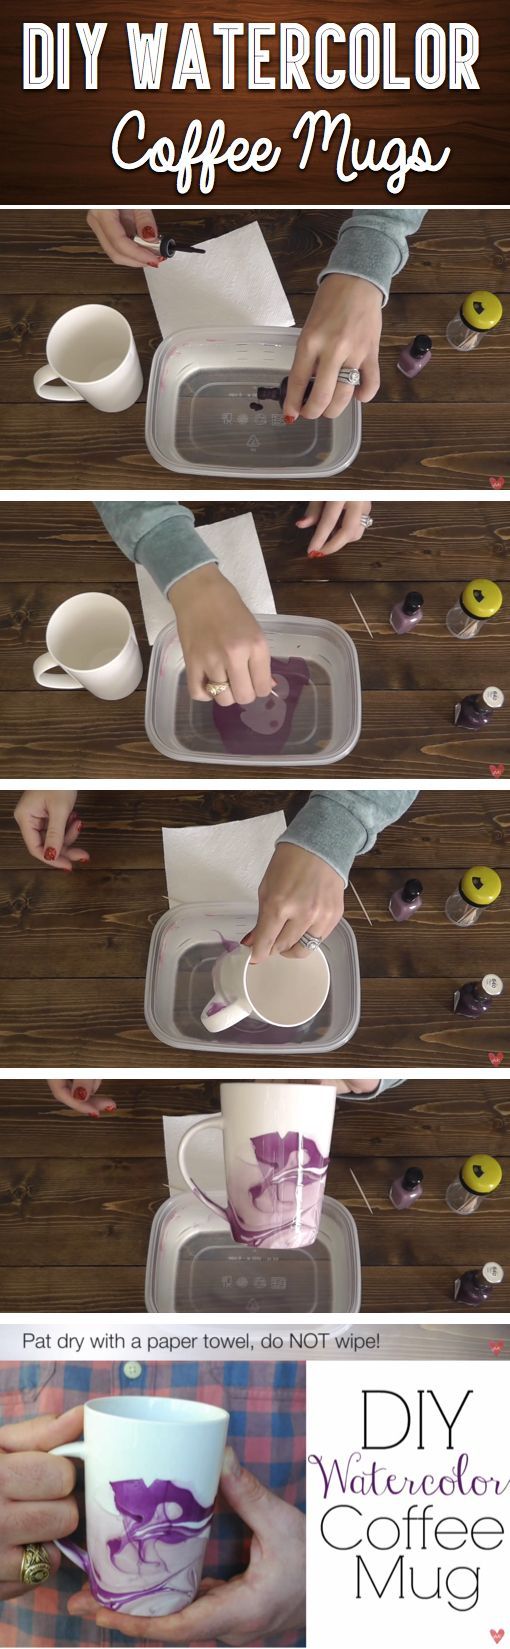 You Will Be Amazed To See What You Can Achieve With A Plain Coffee Cup And Some Nail Polish! – She Turned